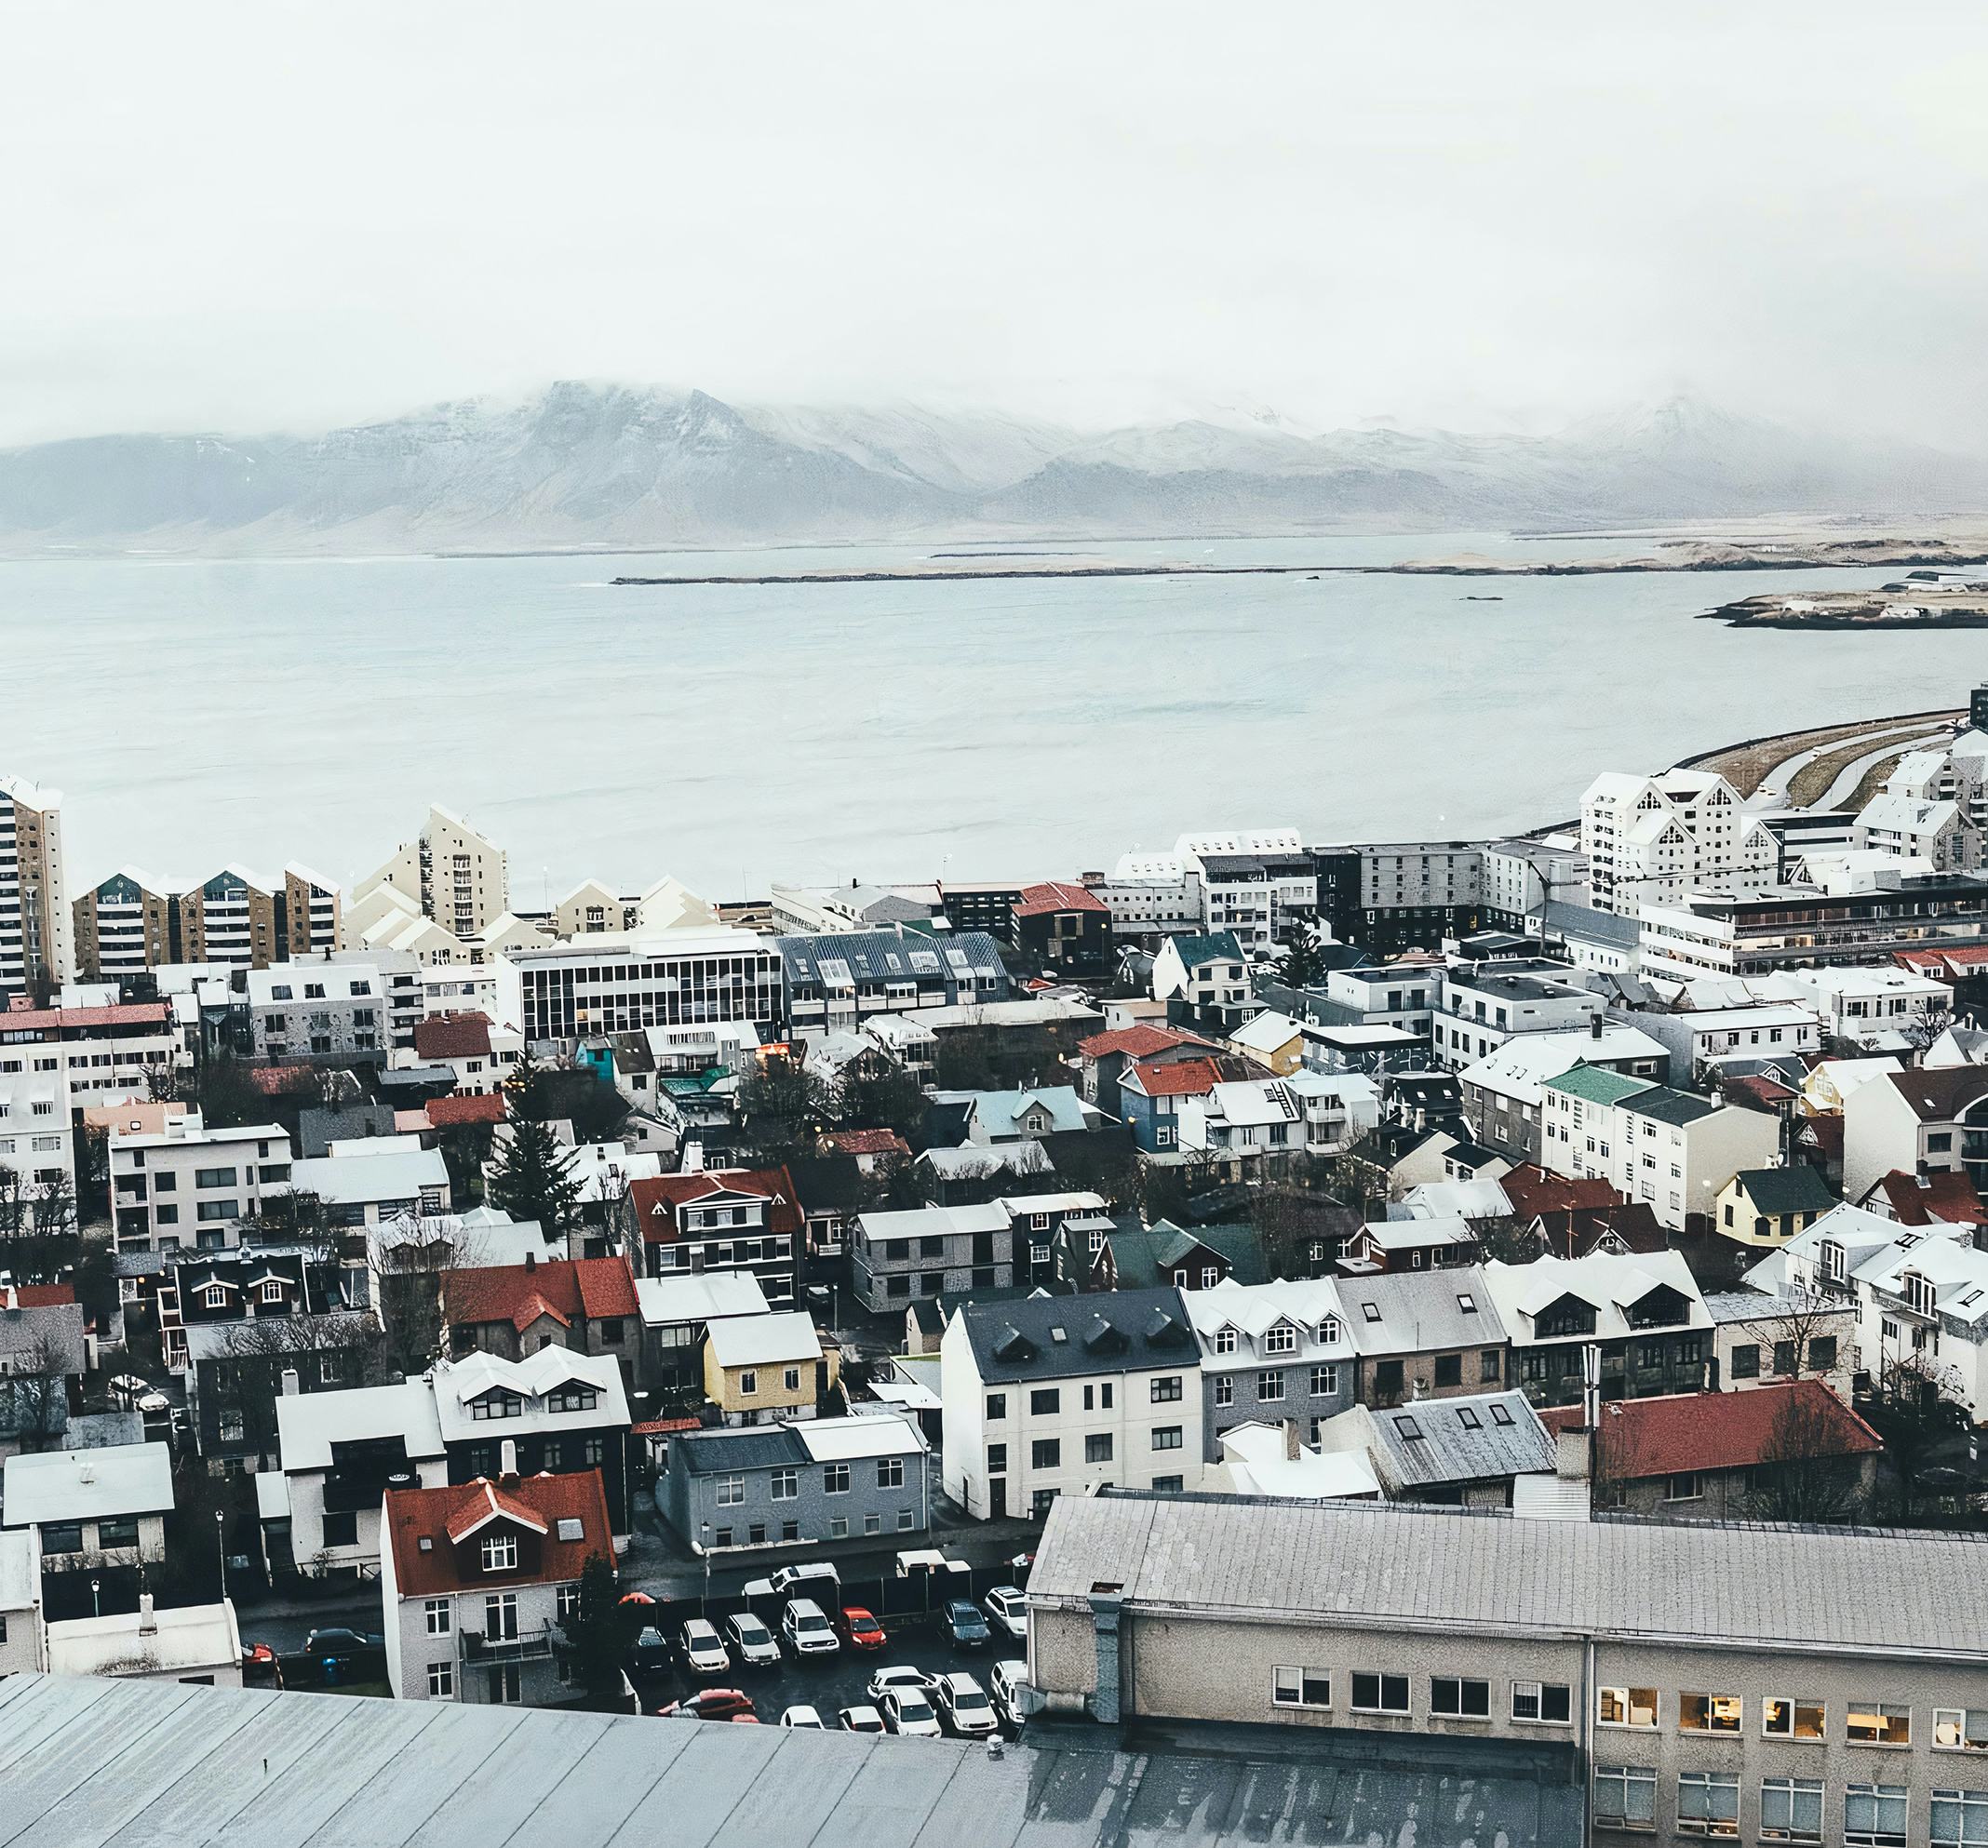 Reykjavik with Esja in the background.